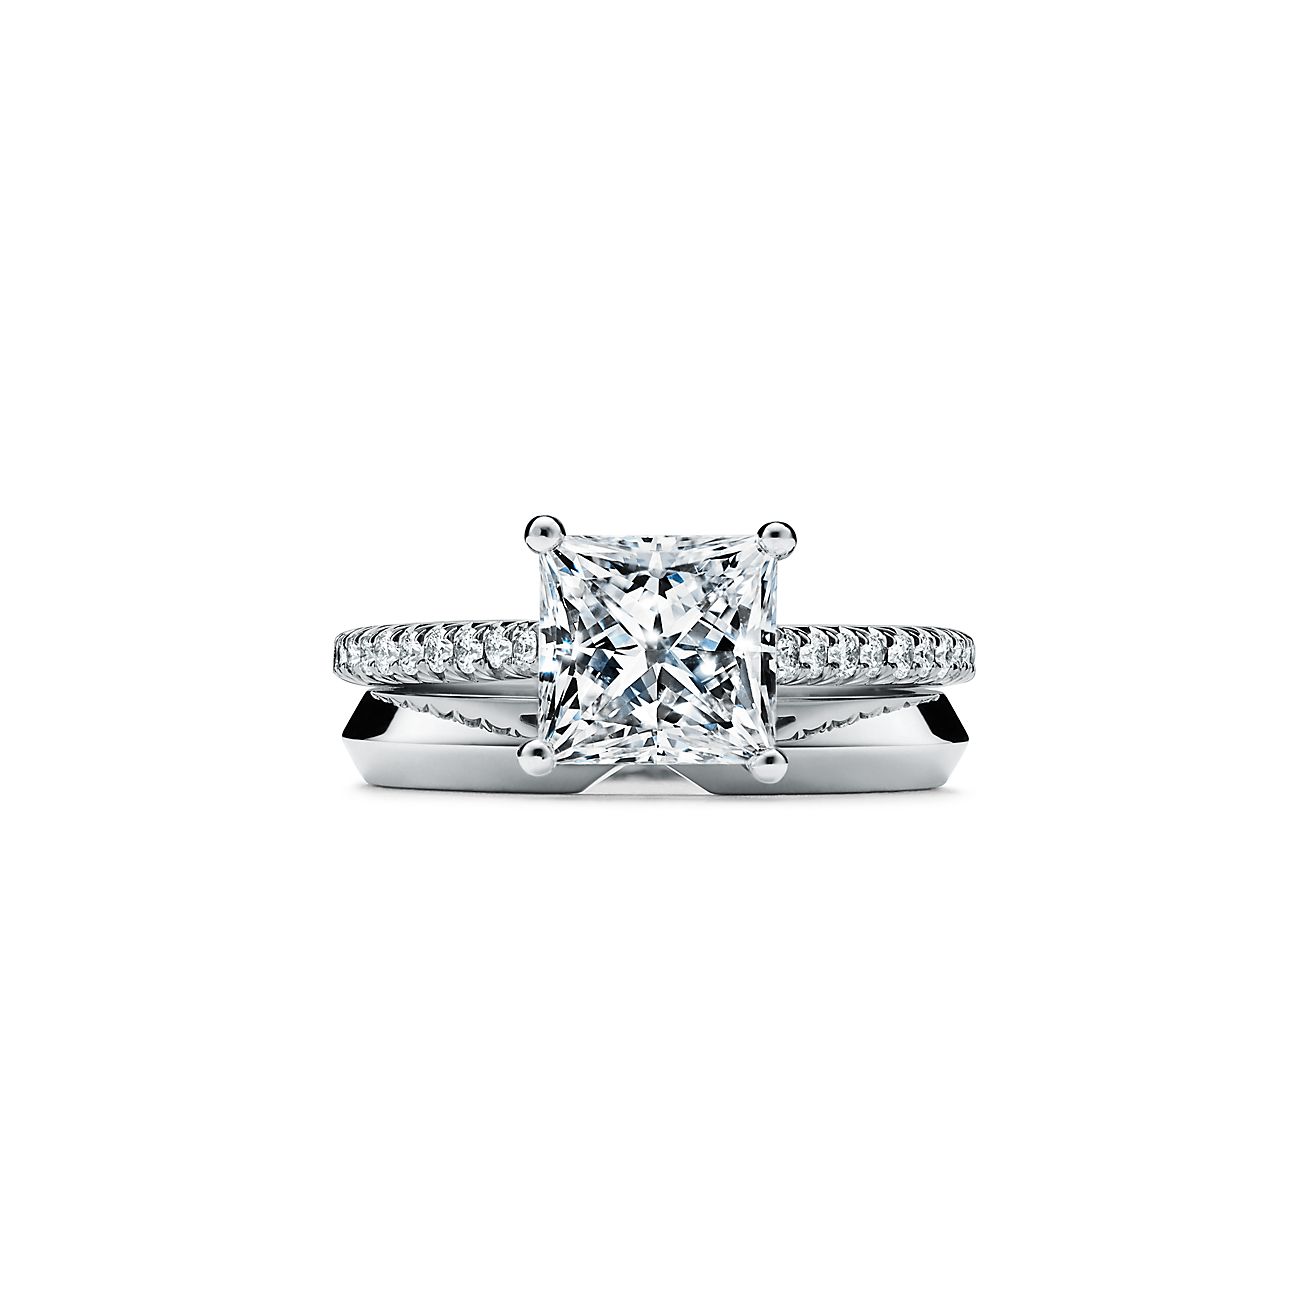 24 Tiffany Engagement Rings That Will Totally Inspire You | Oh So Perfect  Proposal